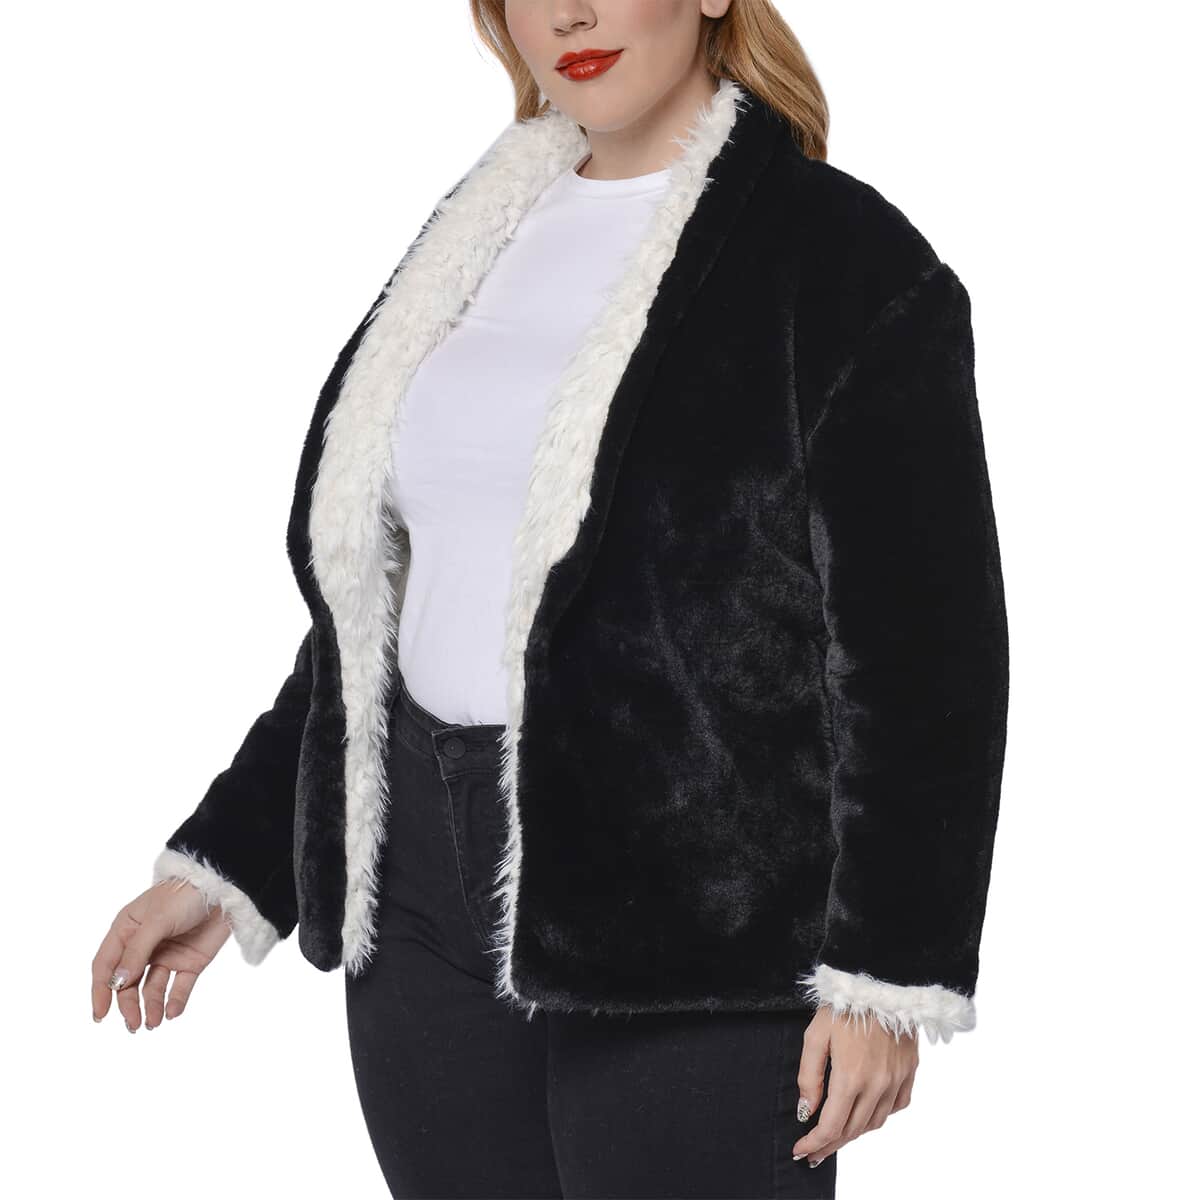 PASSAGE Black And White Reversible Womens Coat With Shawl Collar And Long Sleeves (M, 100% Polyester) image number 2